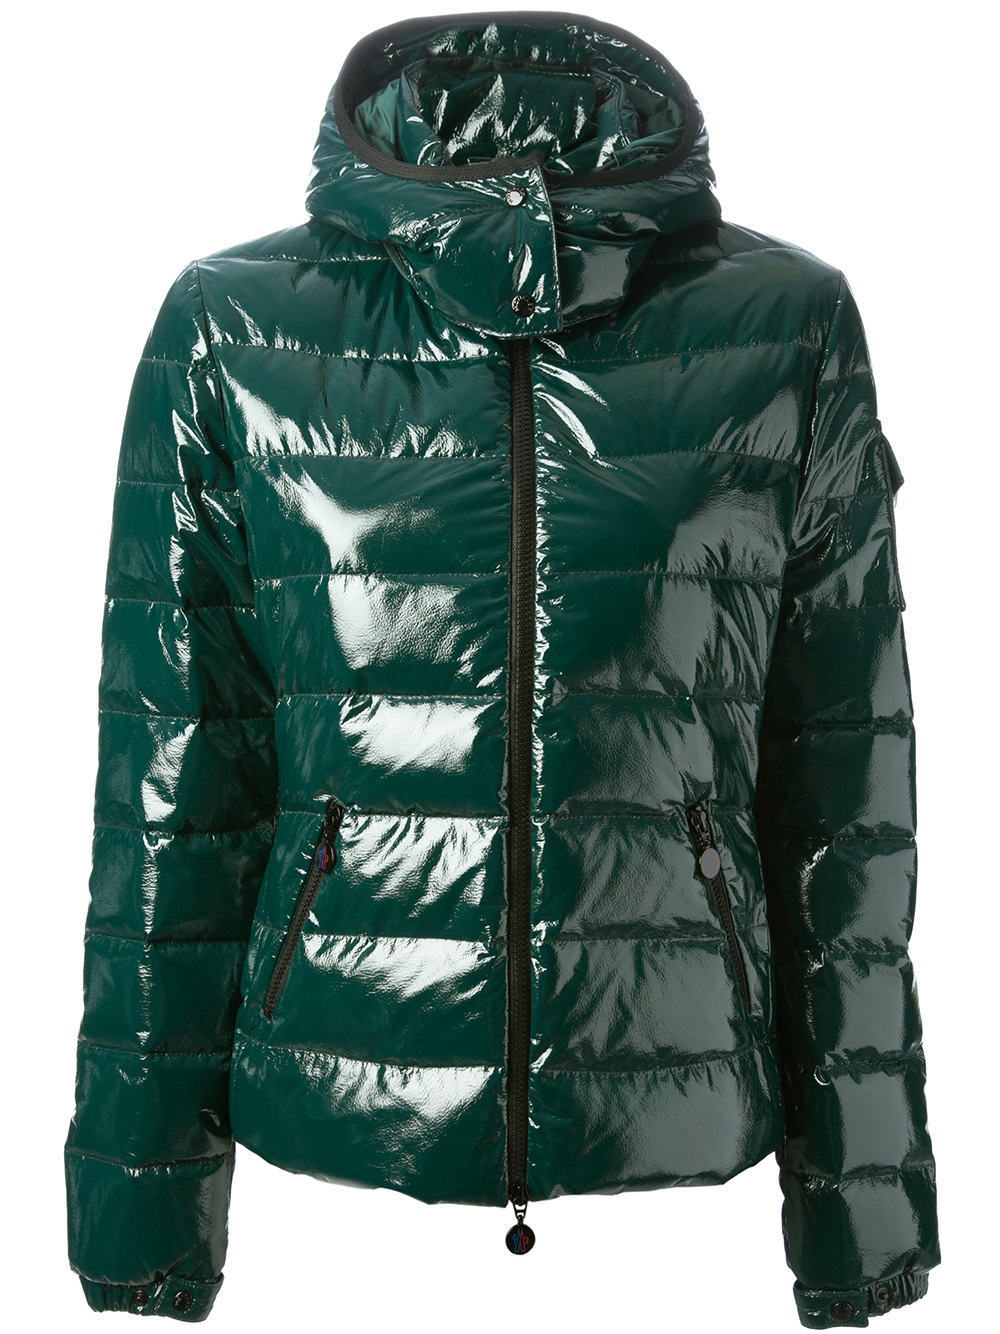 Lyst - Moncler Bady Jacket in Green